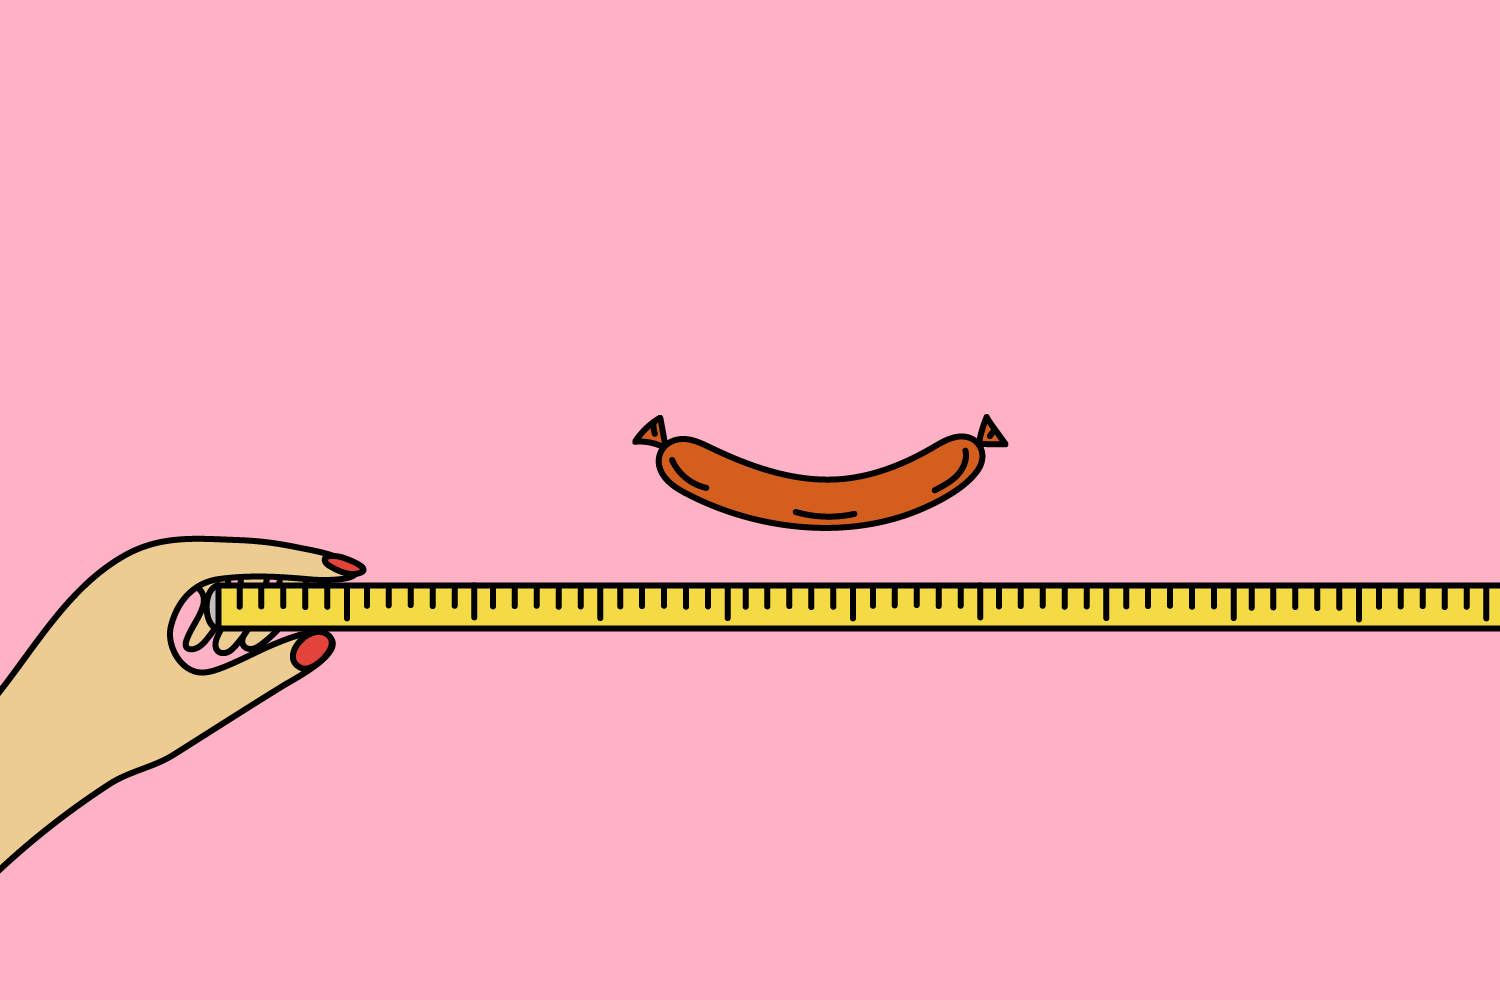 Men Are Underestimating Their Penis Size